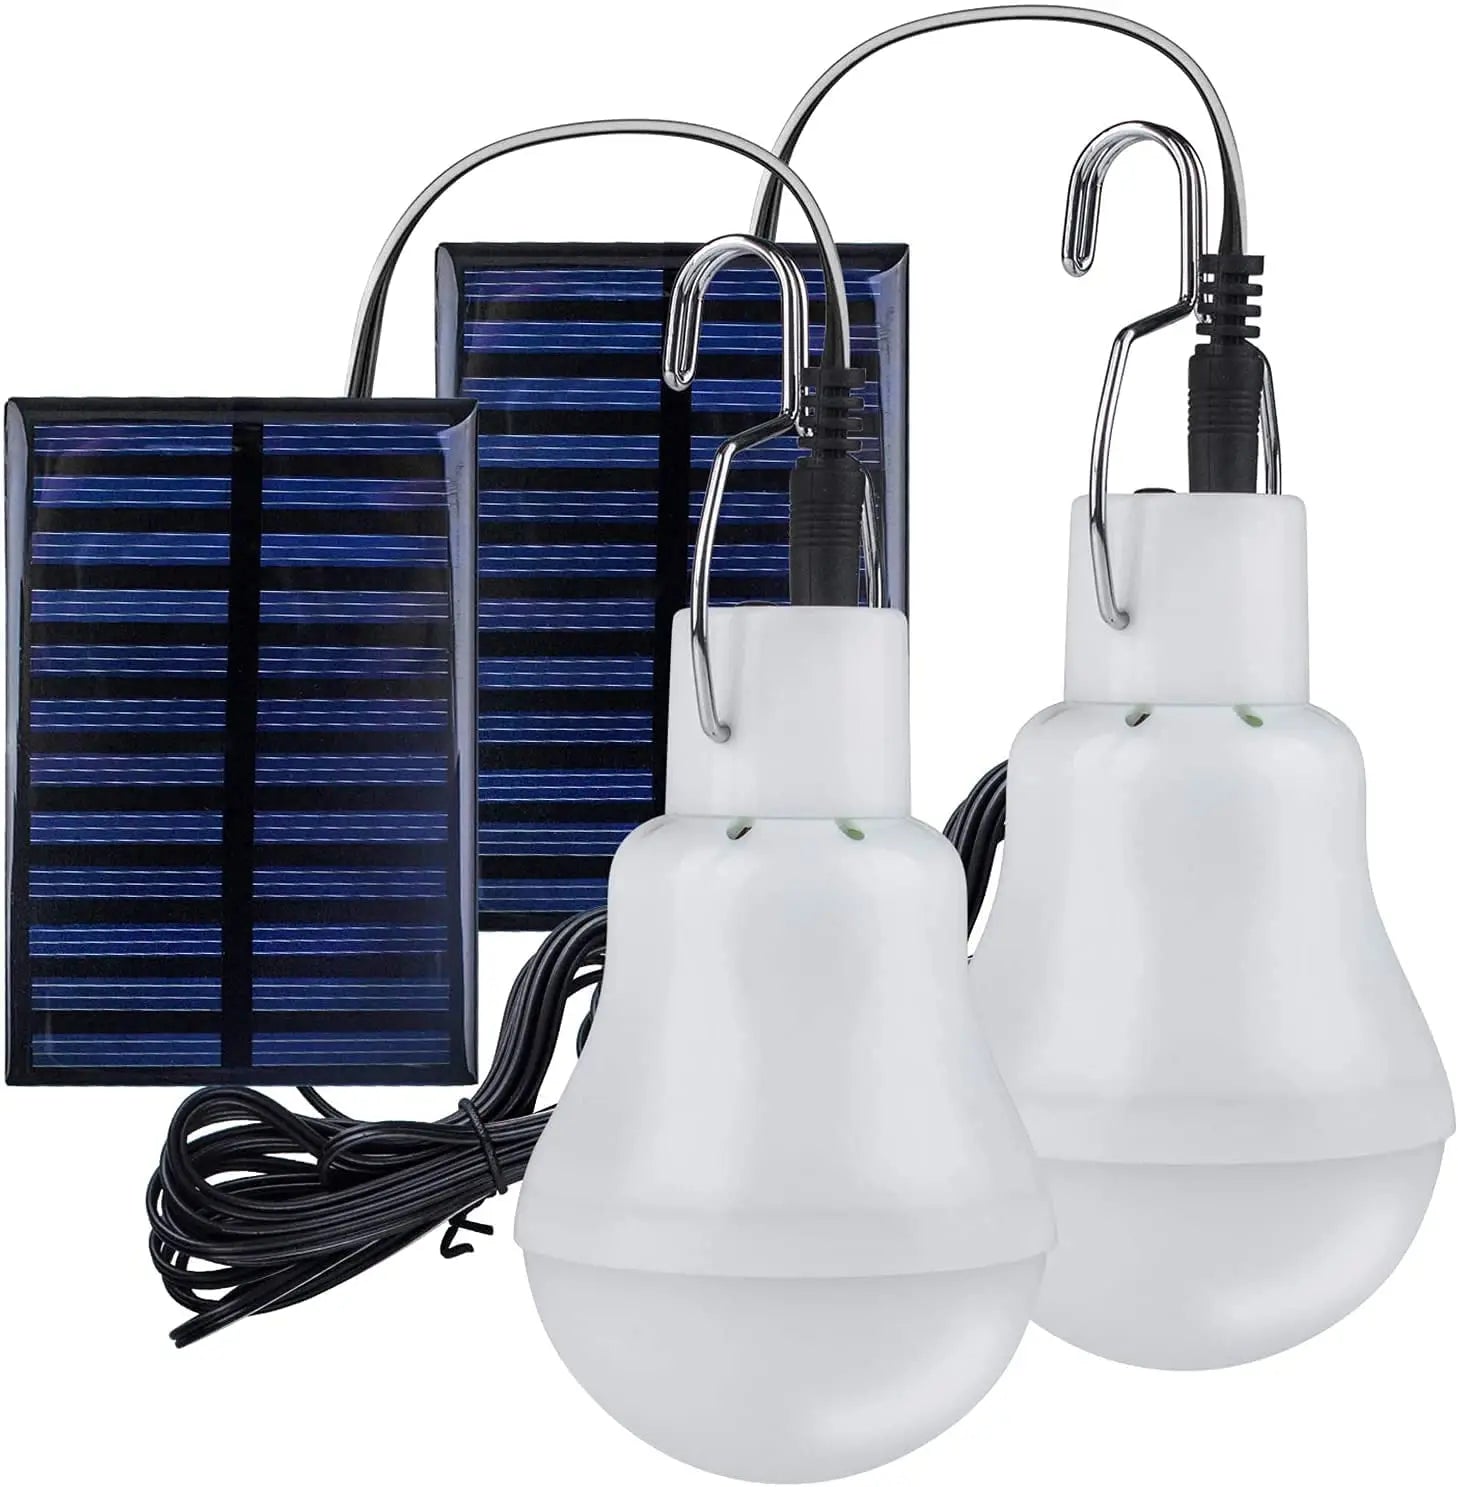 LED Solar Bulb Light, Charging solar-powered lights requires 4-5 hours of direct sunlight.